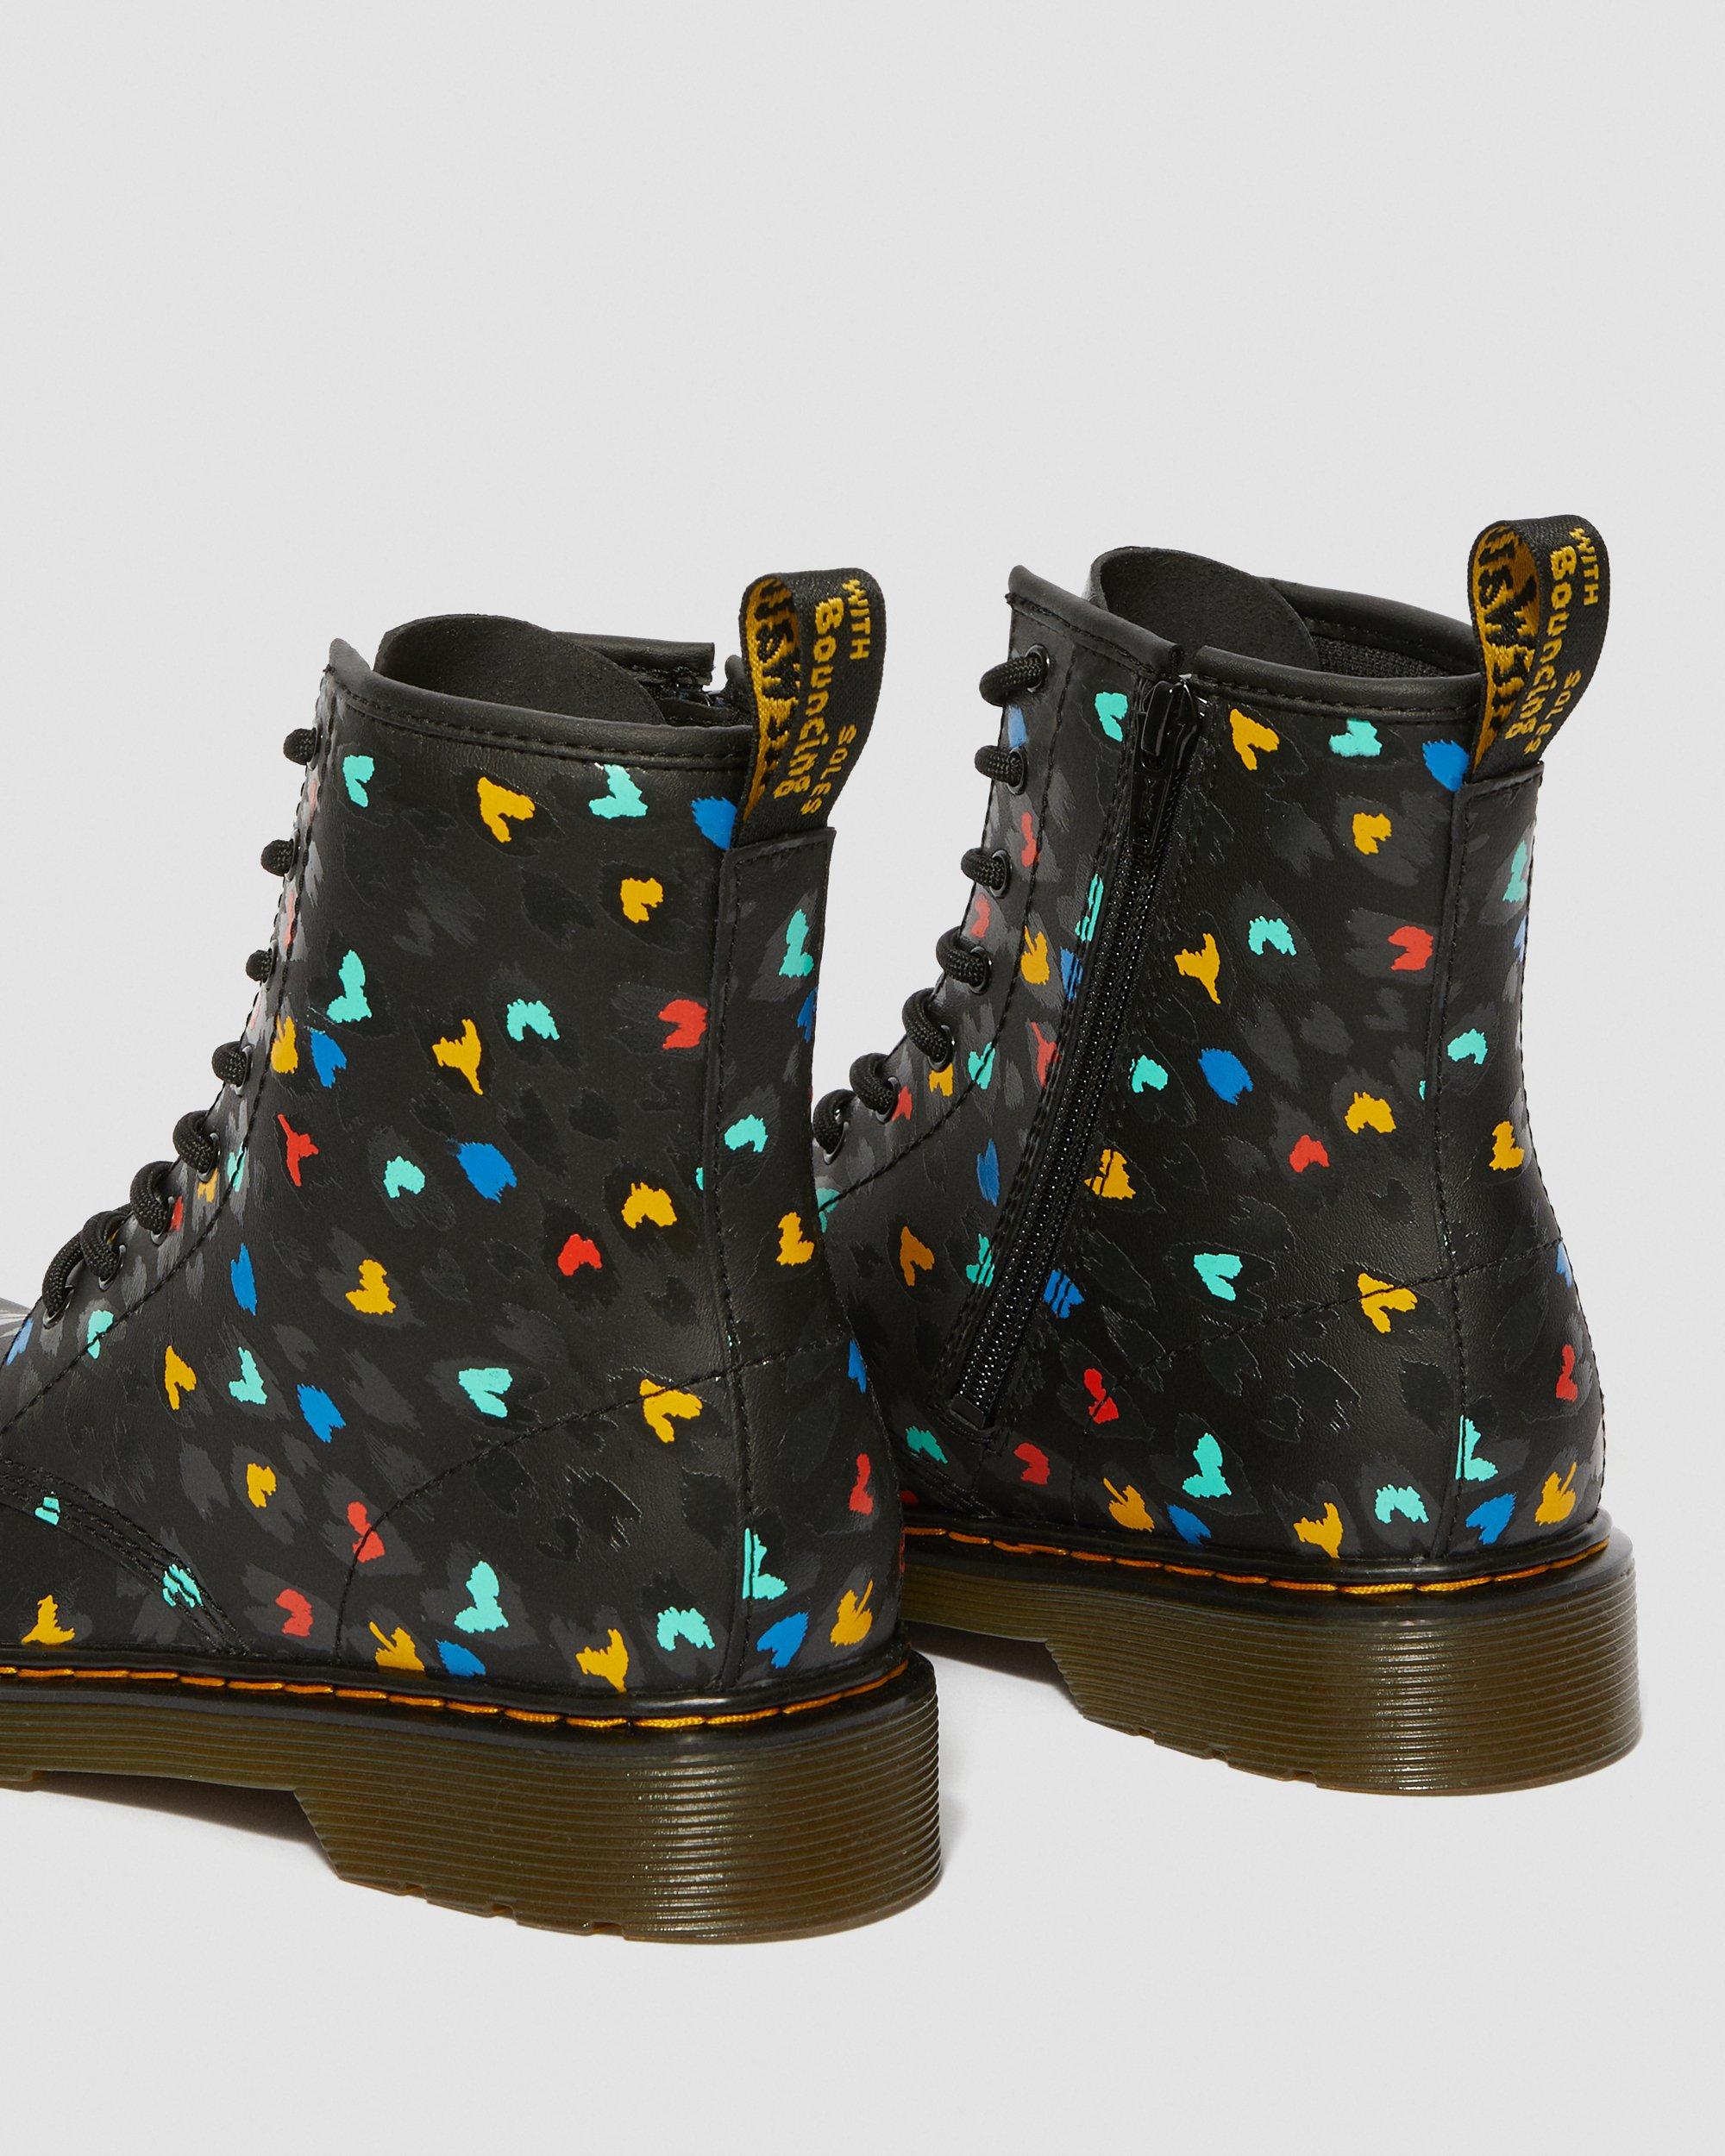 YOUTH 1460 LEATHER HEART PRINTED LACE UP BOOTS in Svart+Multi